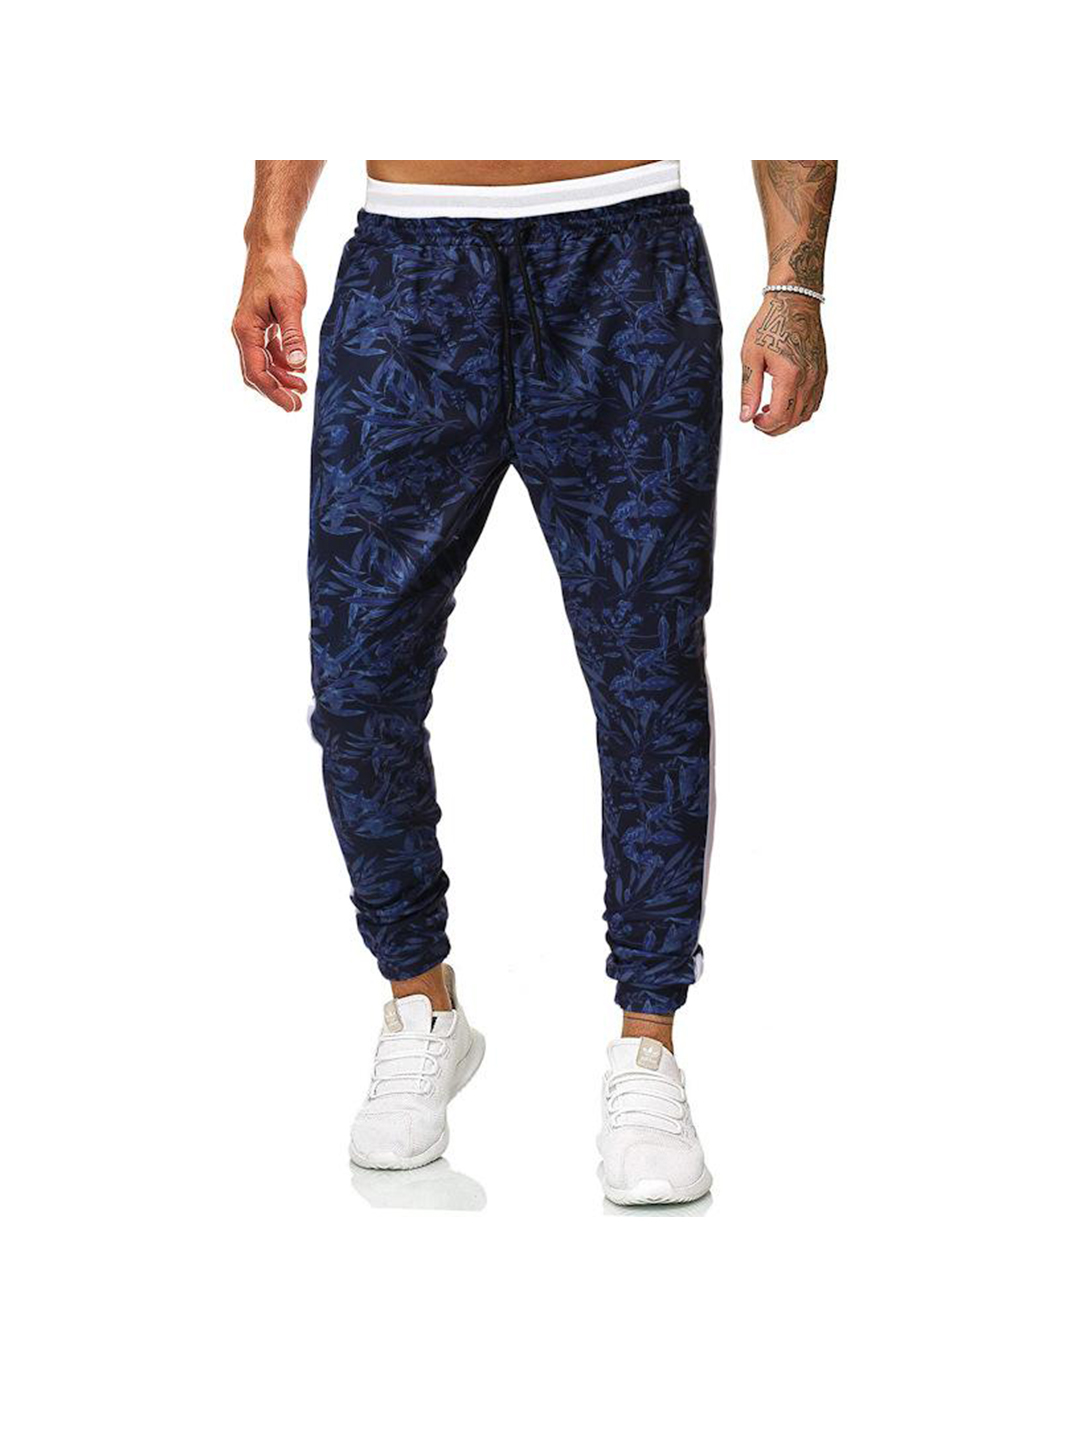 Men's Nelson 3D Floral Printing Casual Joggers-poisonstreetwear.com